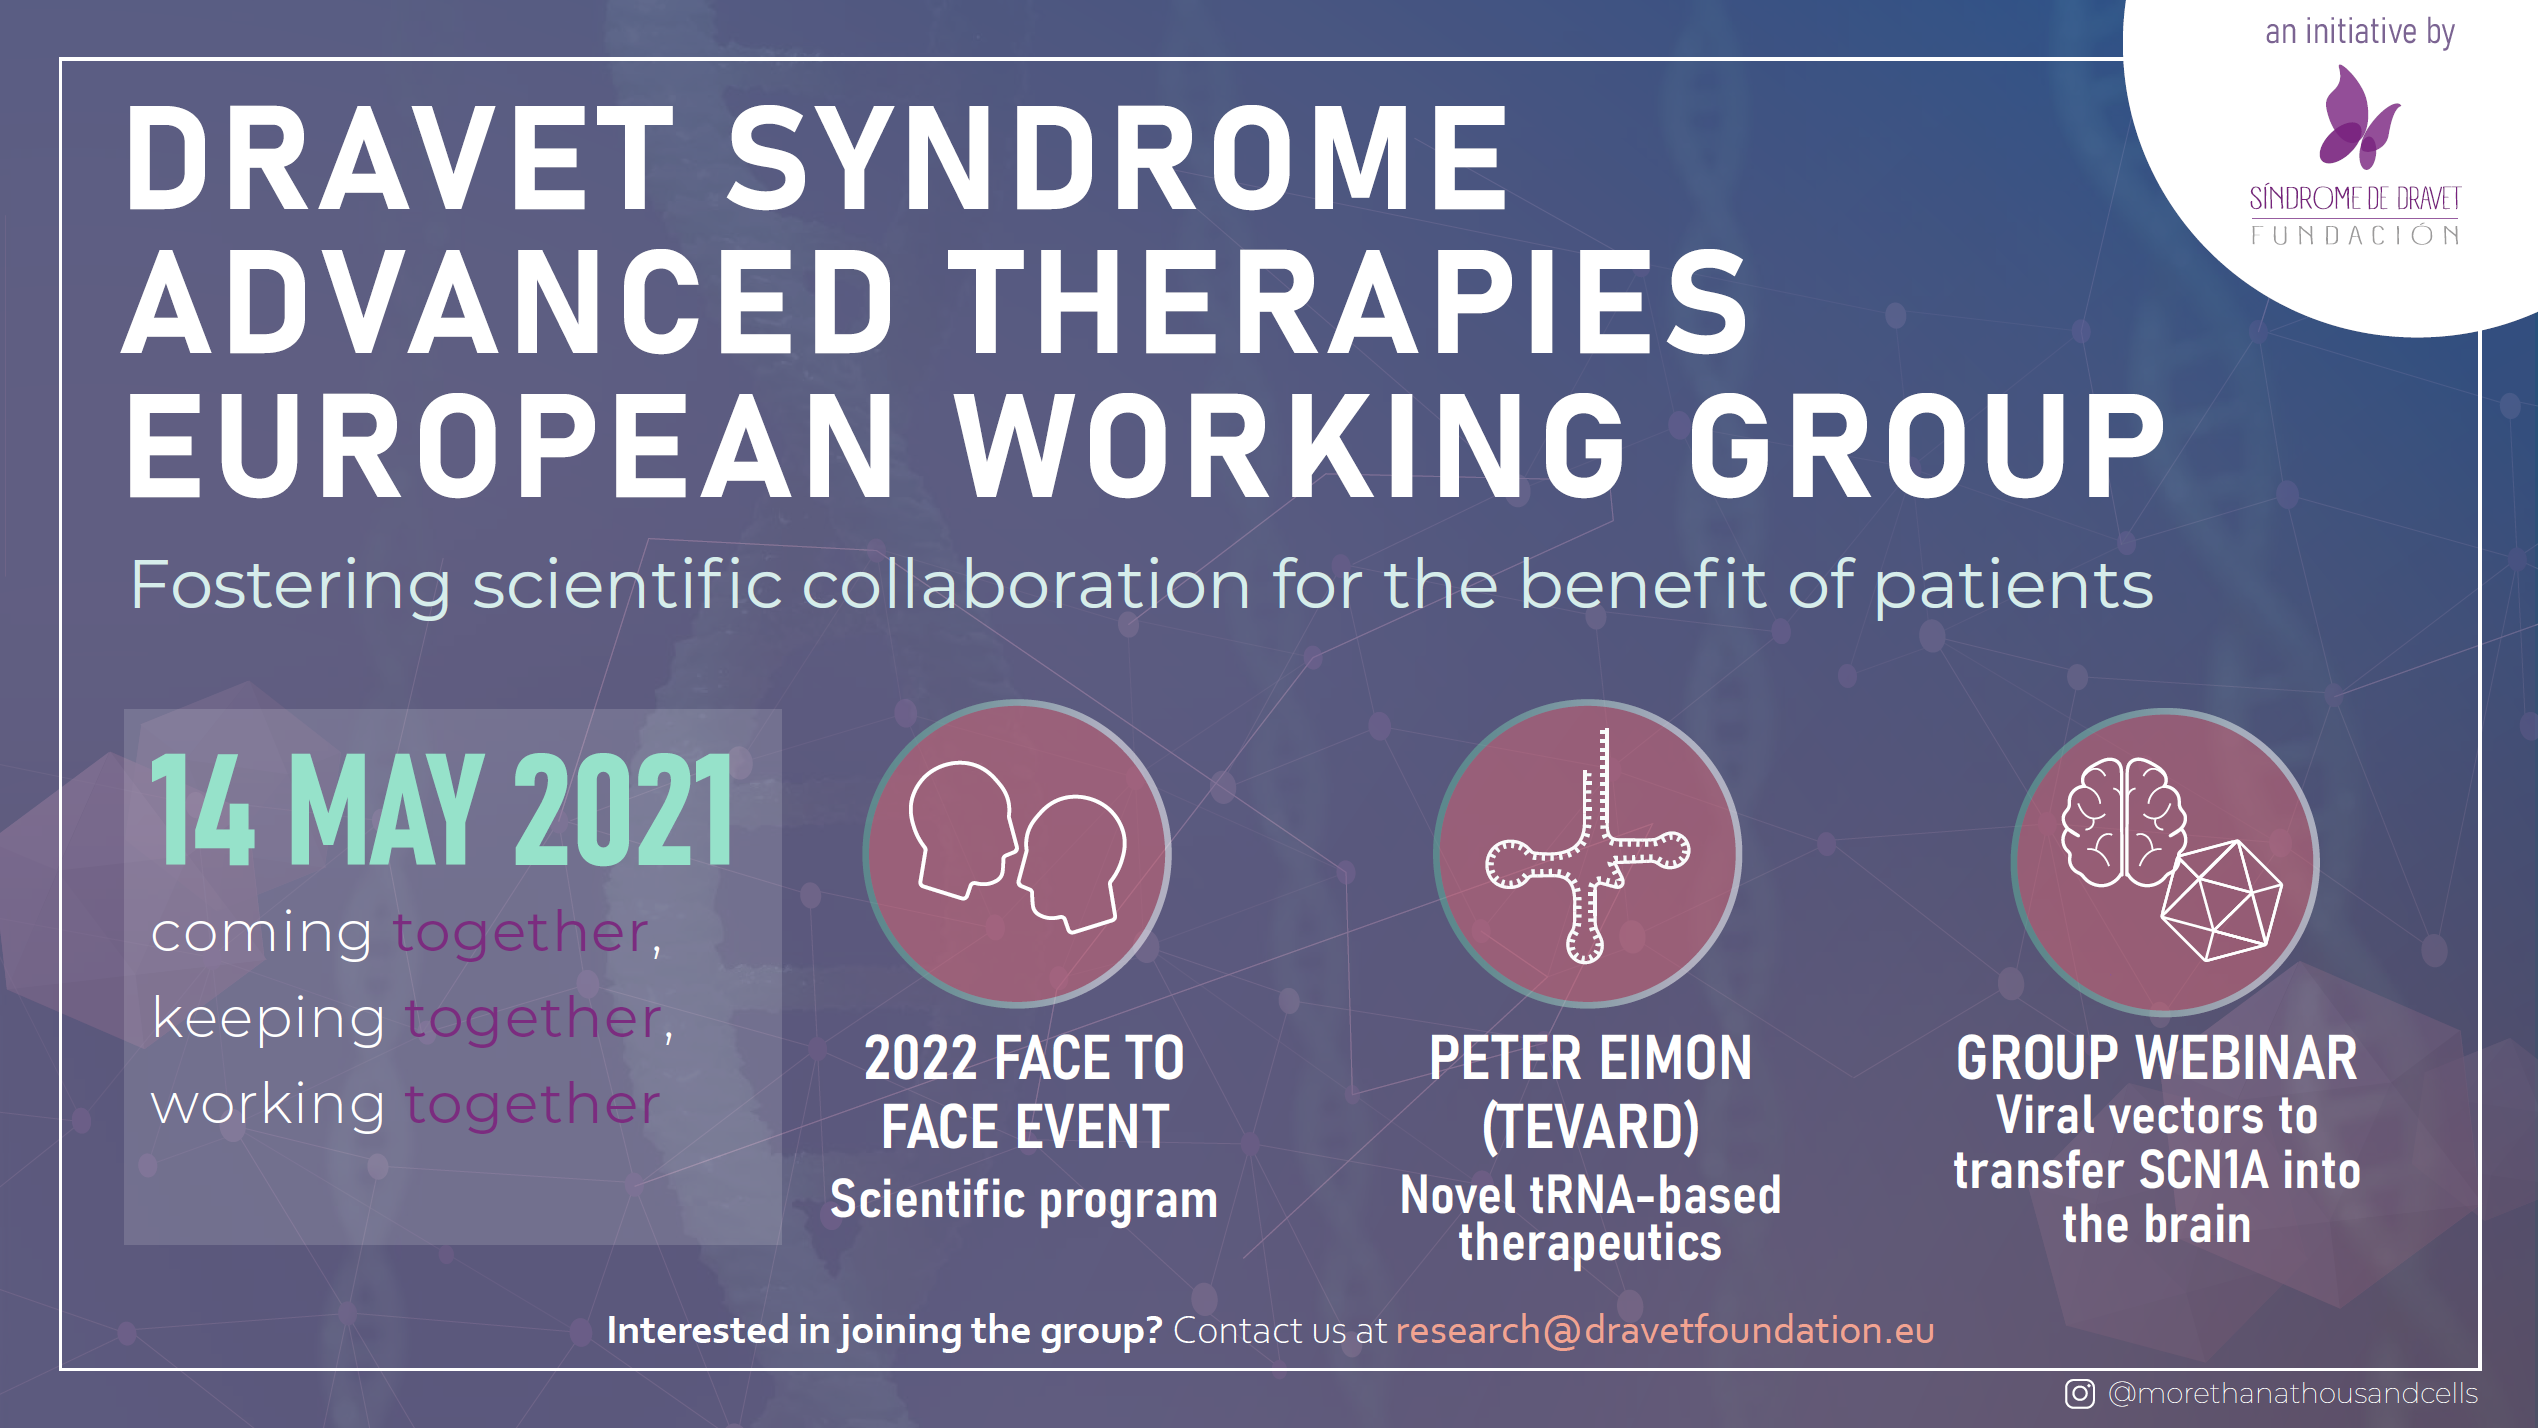 Dravet Syndrome Advanced Therapies European Working Group meeting 4